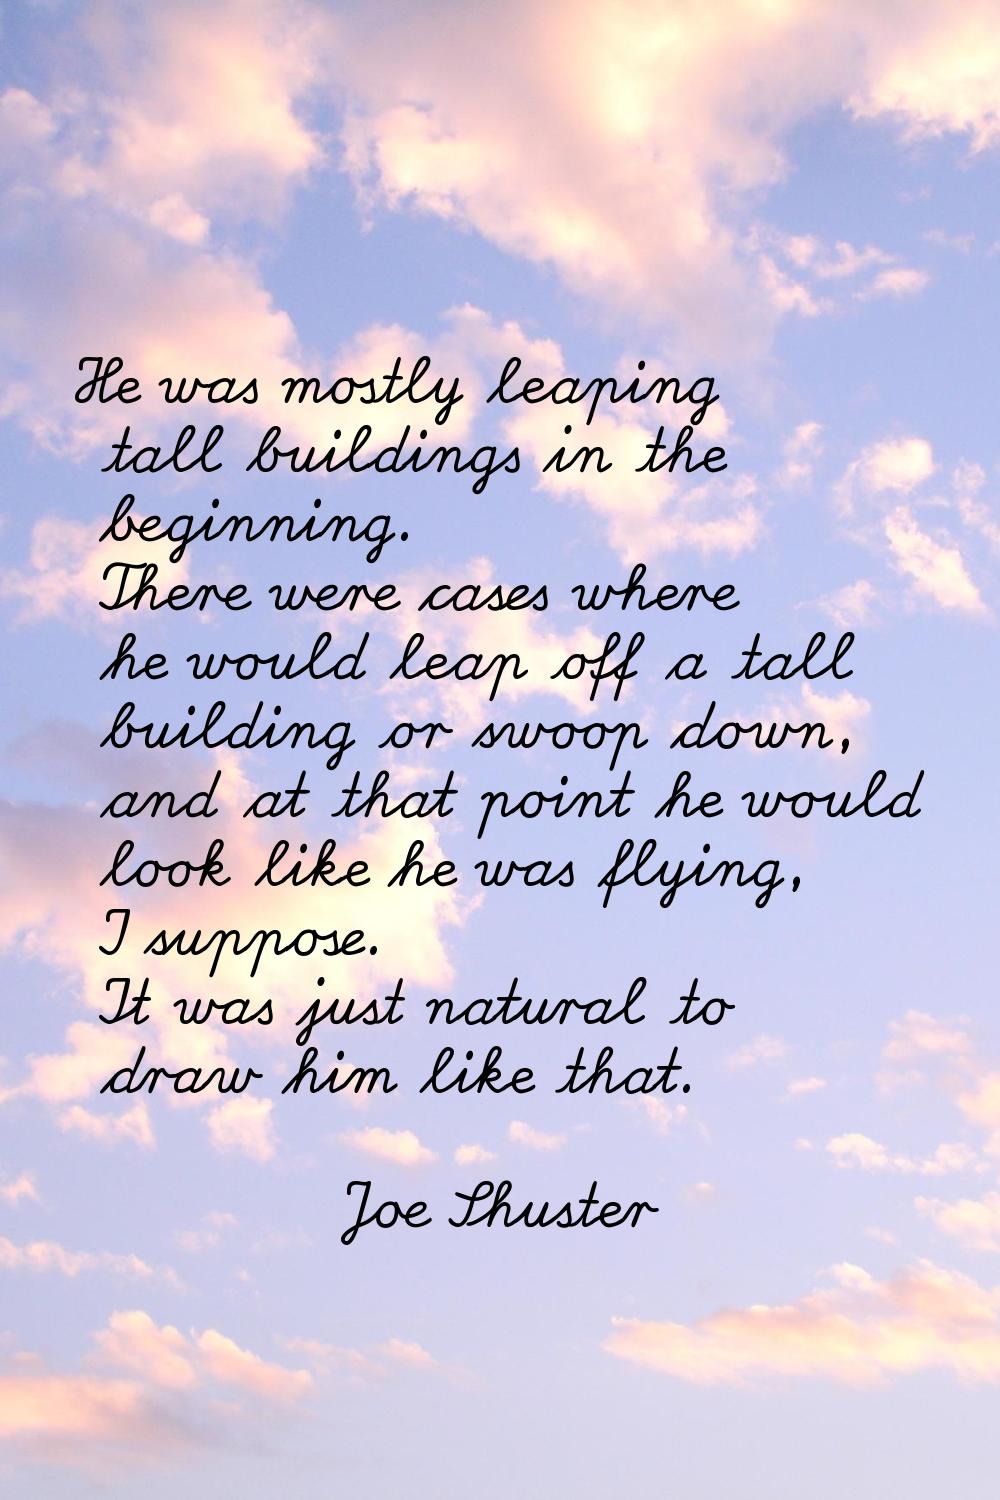 He was mostly leaping tall buildings in the beginning. There were cases where he would leap off a t